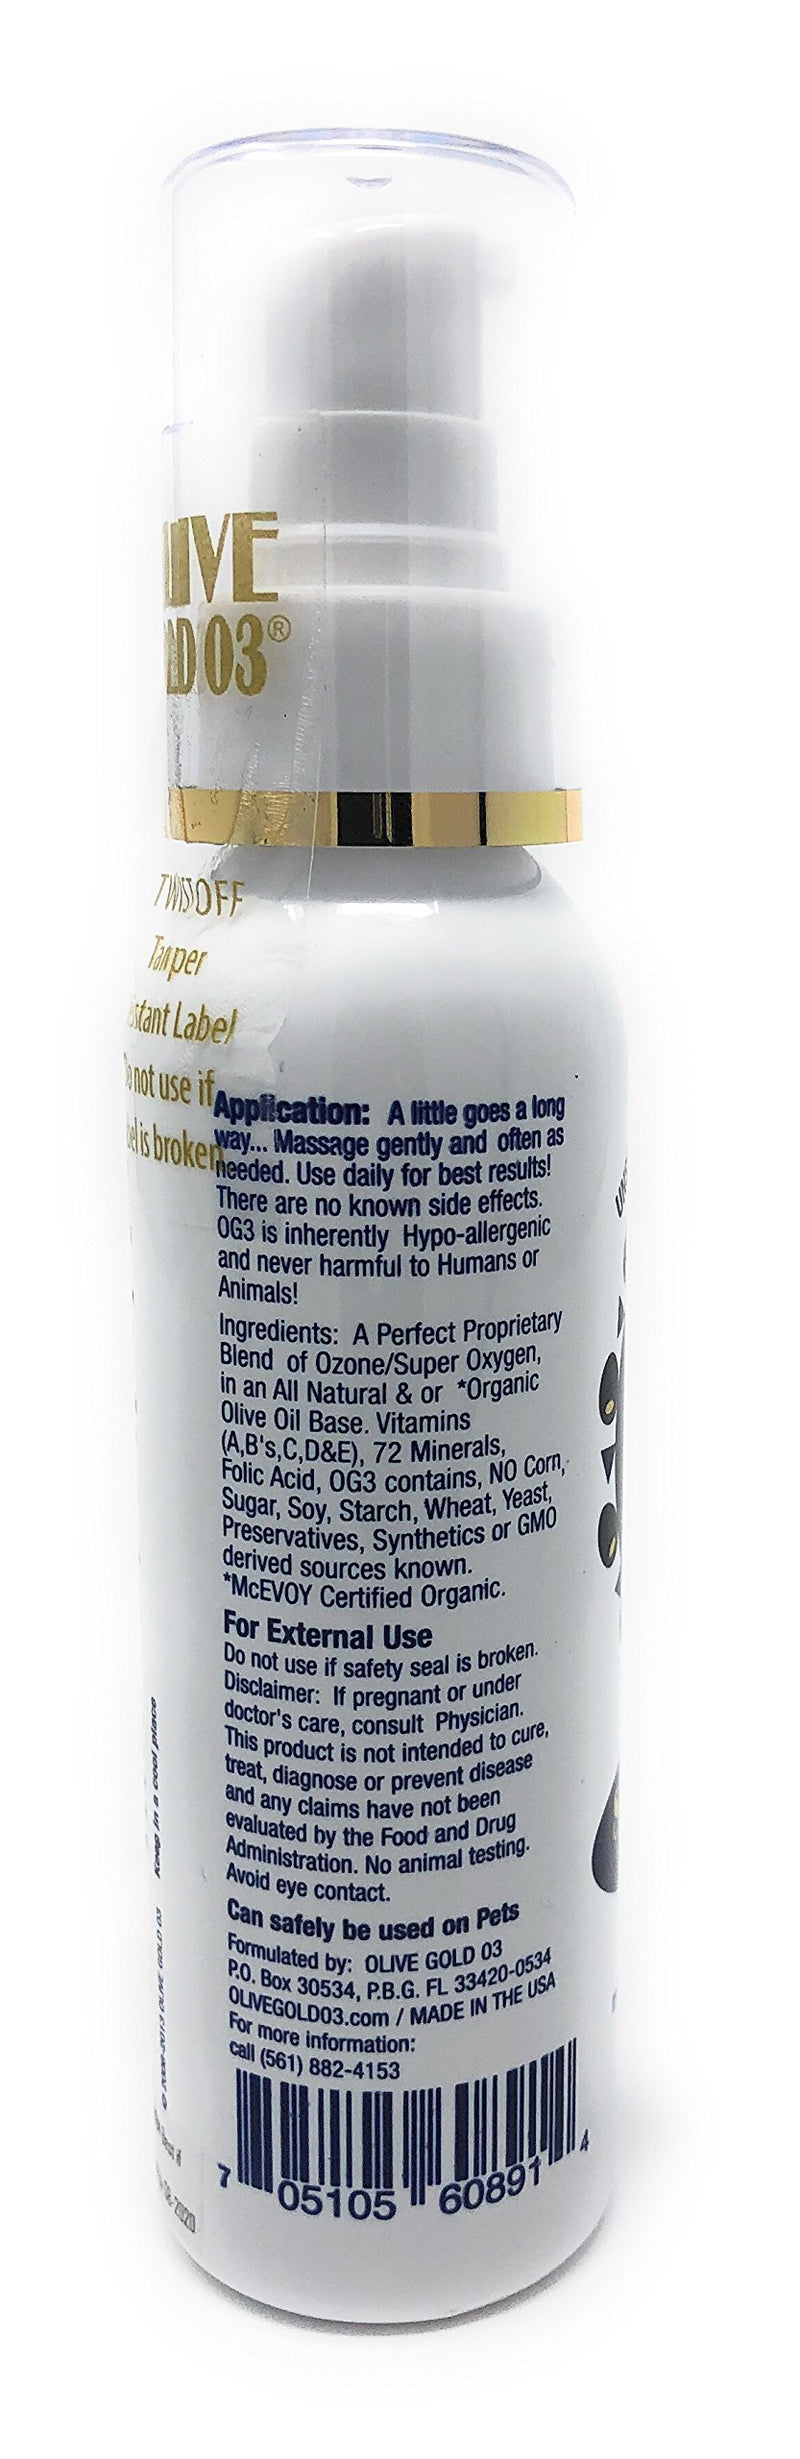 Olive Gold O3 Skin Care Lotion - Ozonated Olive Oil Super Oxygen (4oz) 4 Ounce (Pack of 1) - BeesActive Australia